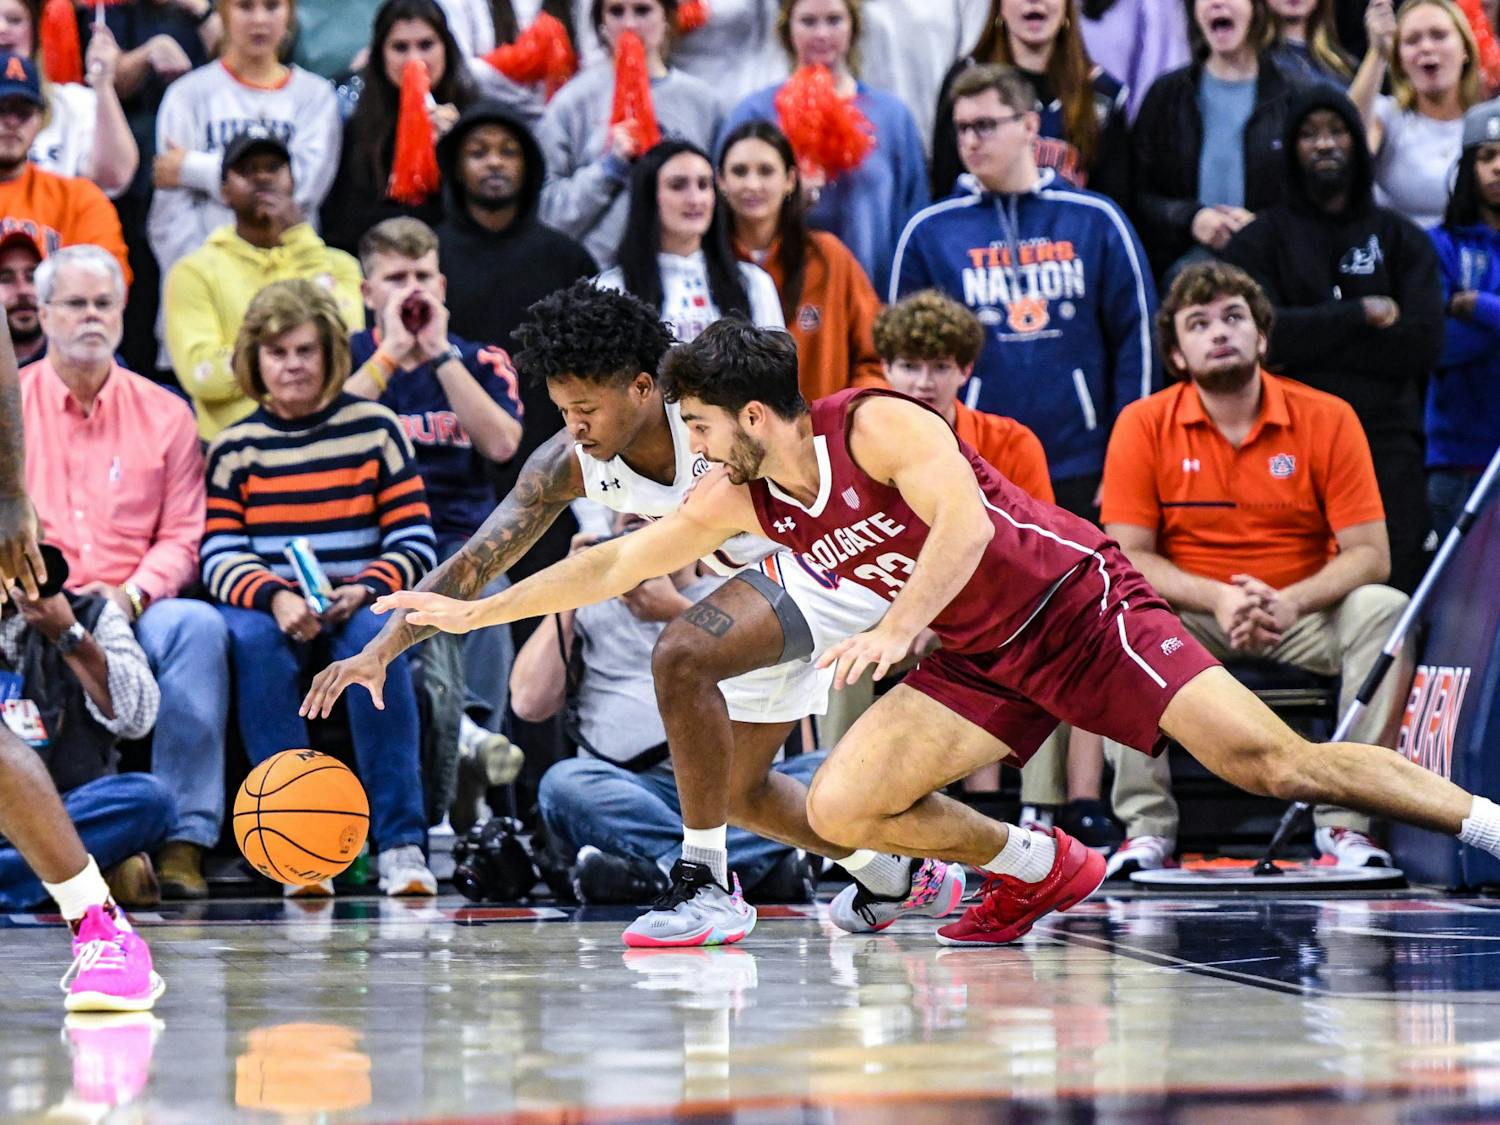 GALLERY: Auburn defeats Colgate for final fall semester home game